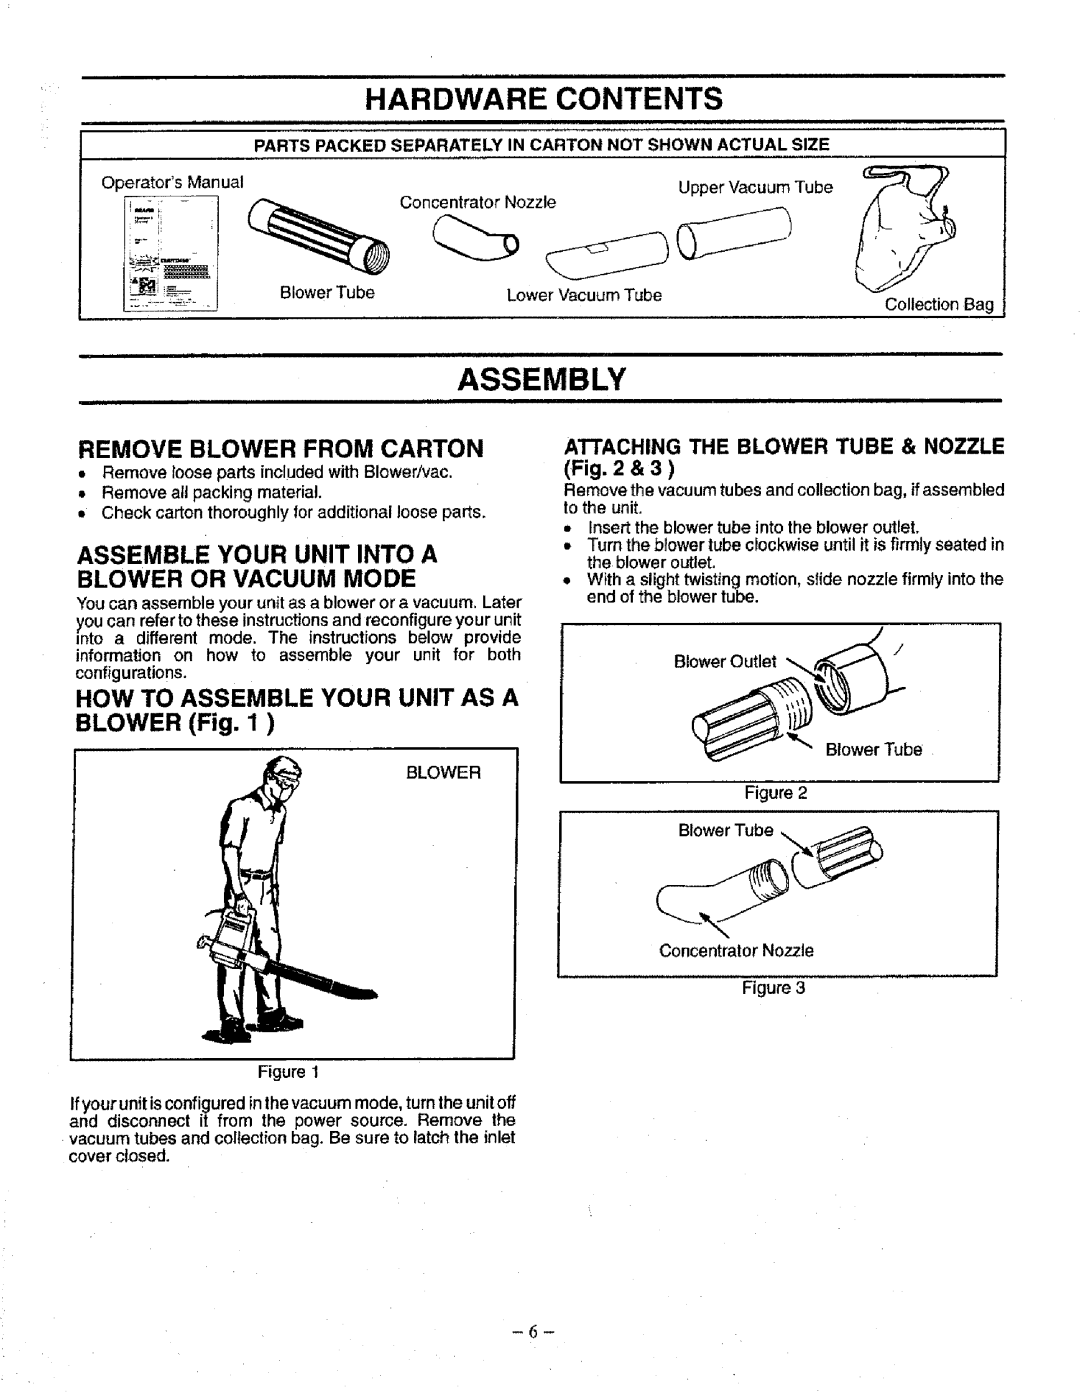 Craftsman 79834 Hardware Contents, Assembly, Remove Blower From Carton, Assemble Your Unit Into A Blower Or Vacuum Mode 